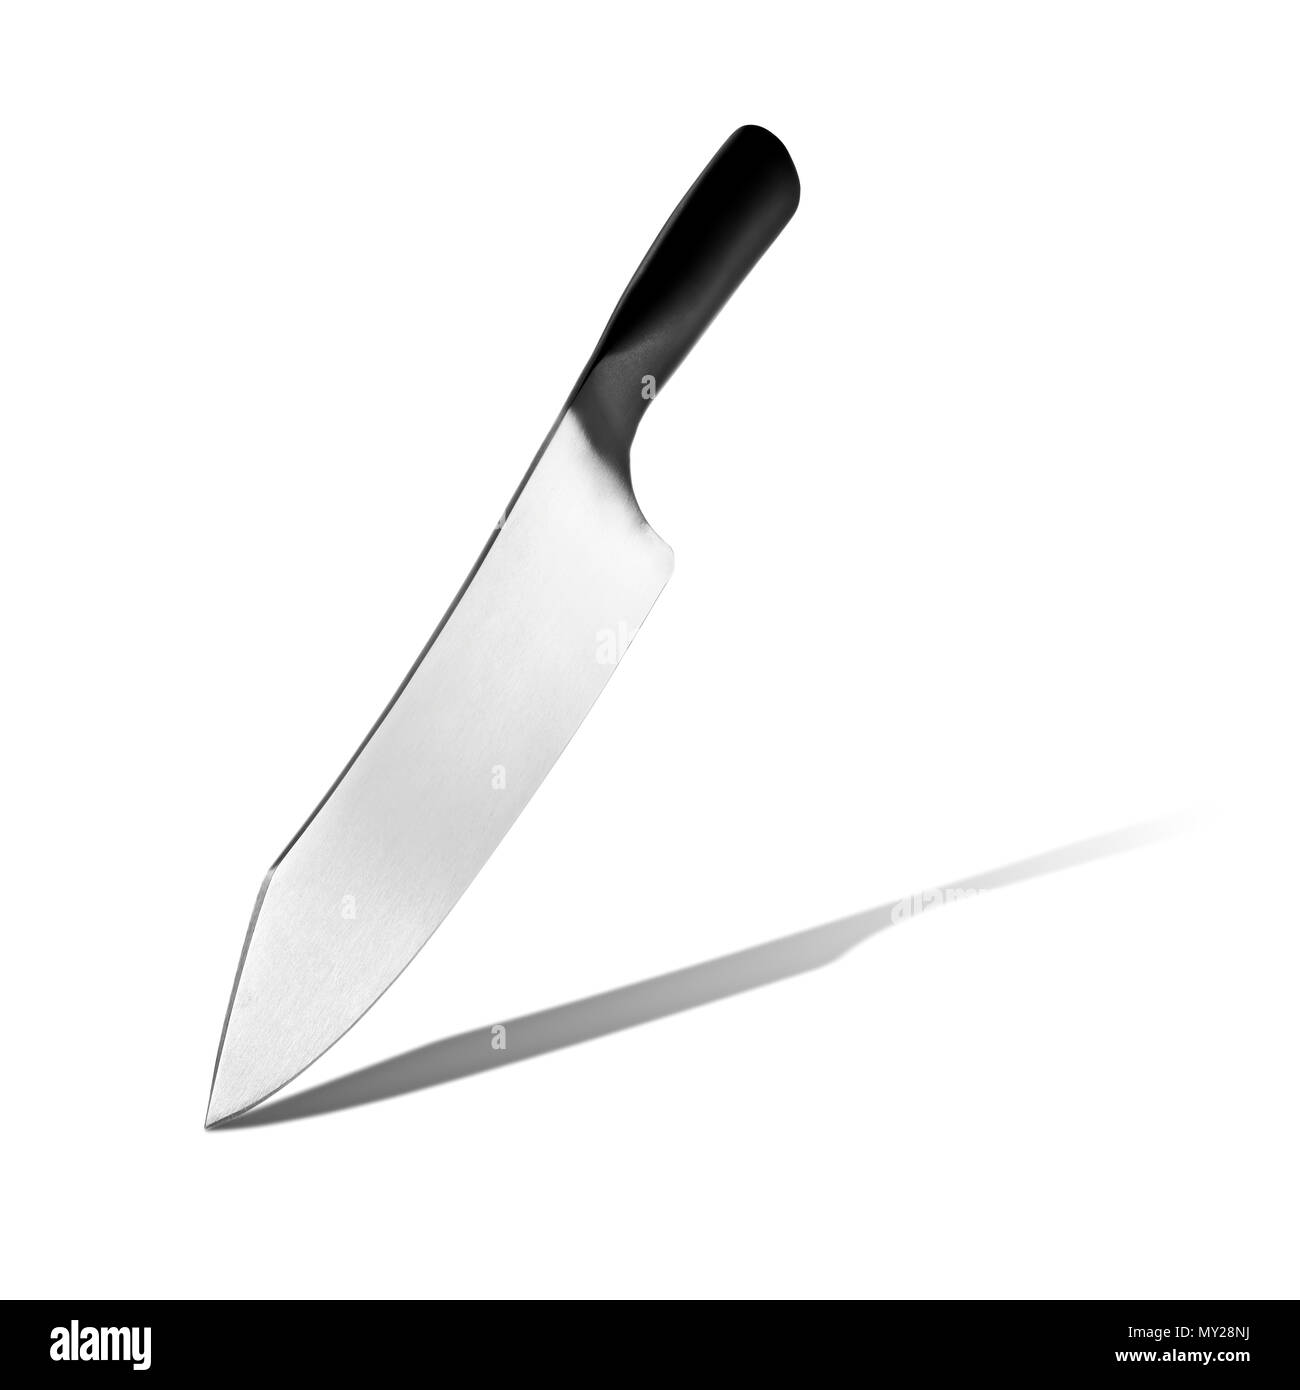 Meat knife making a chopping movement on isolated white background Stock Photo